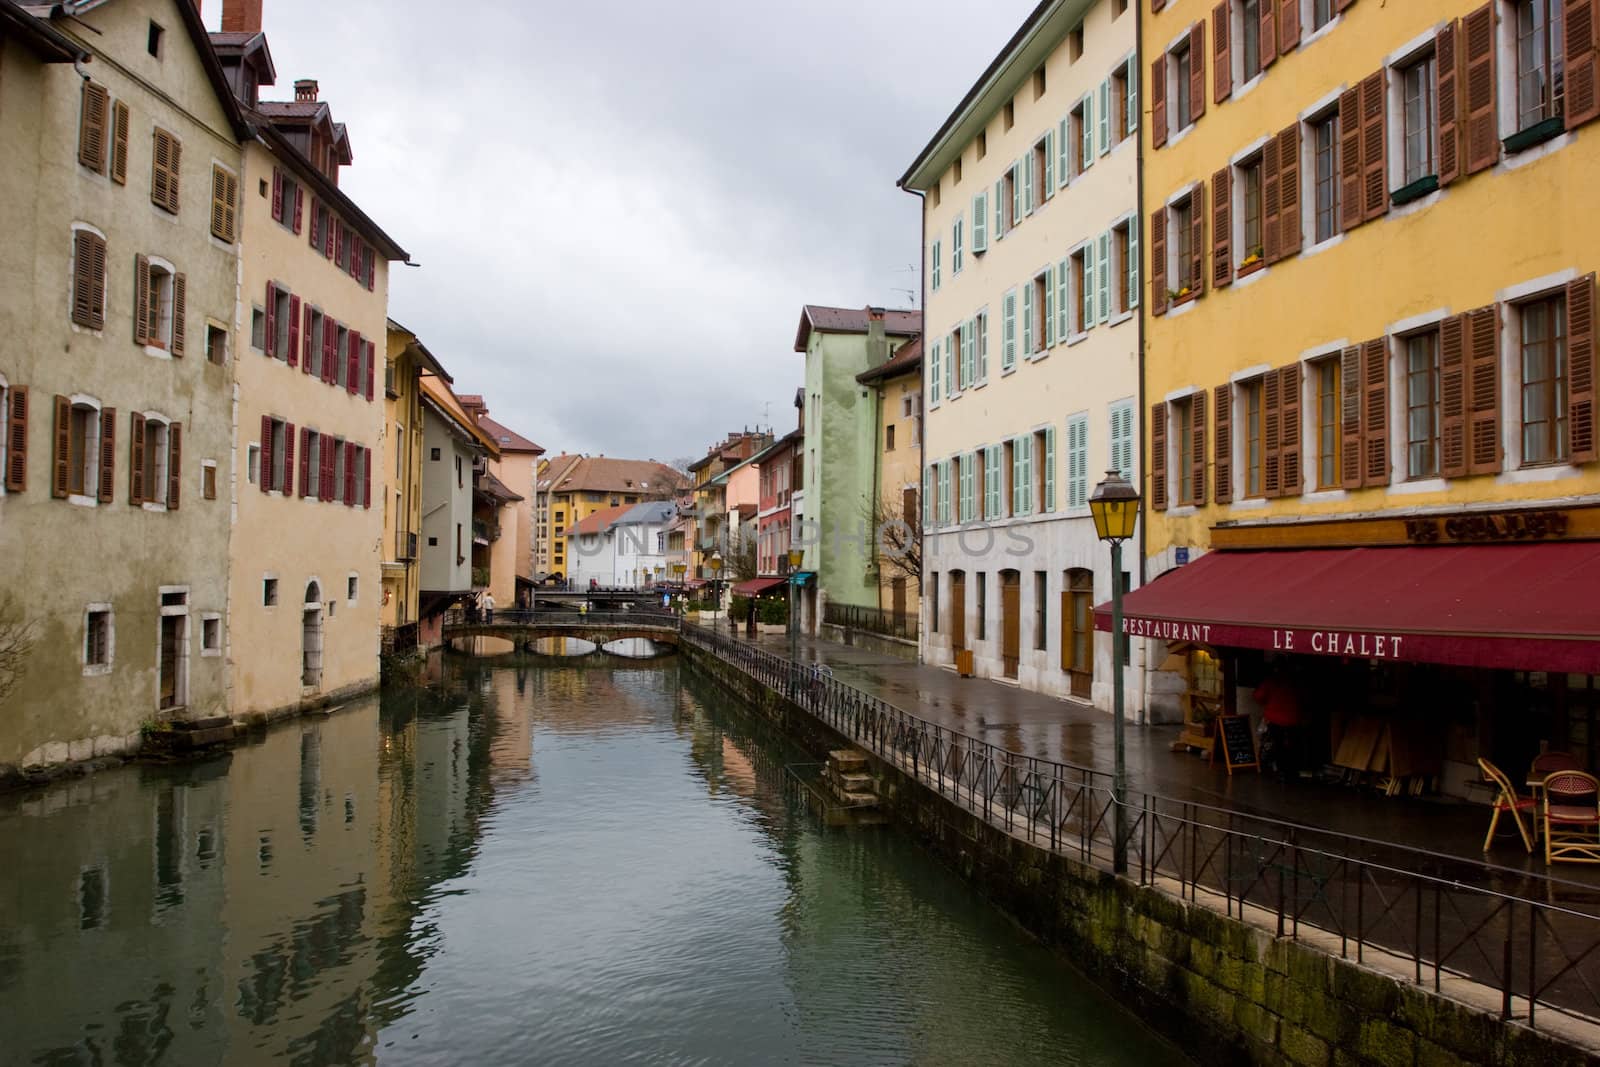 Canal at medieval town of Annecy, France